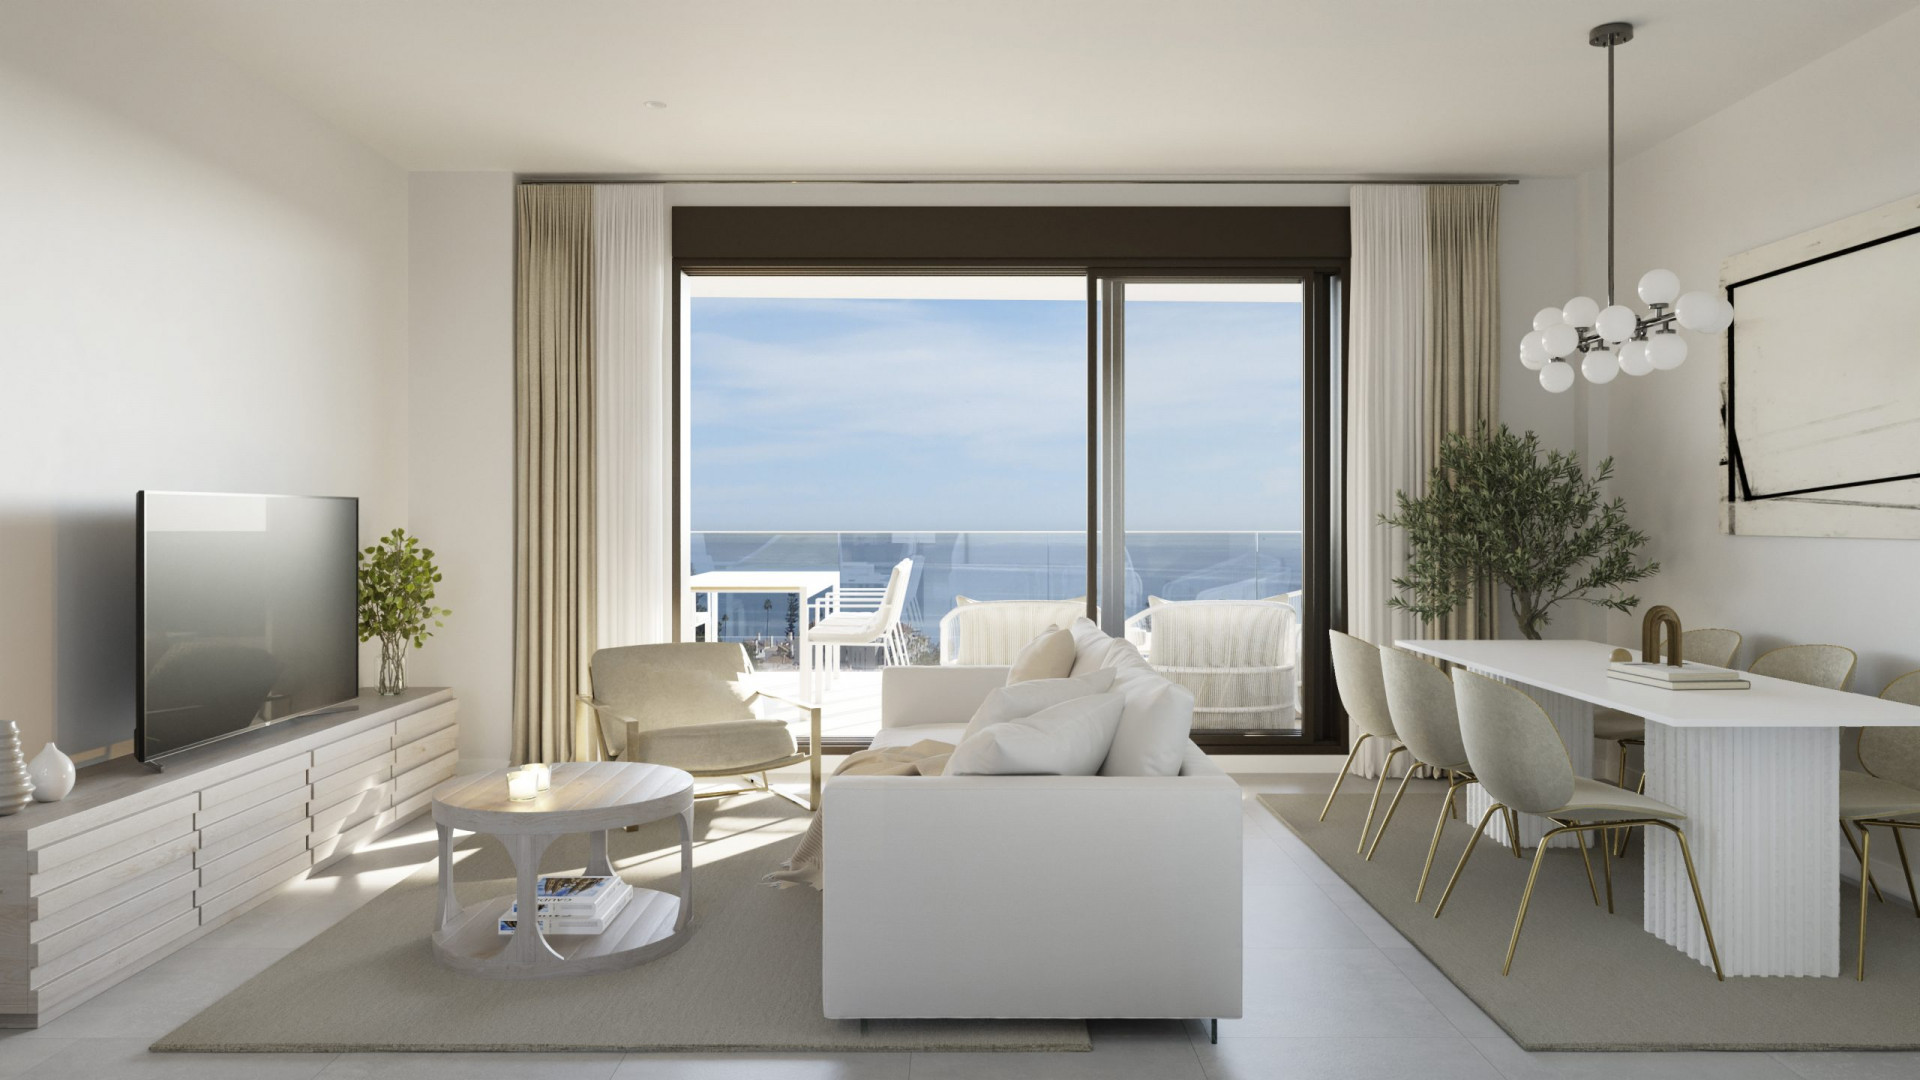 Idilia Mare: Development of 34 modern flats and penthouses with sea views in Rincón de la Victoria. | Image 13